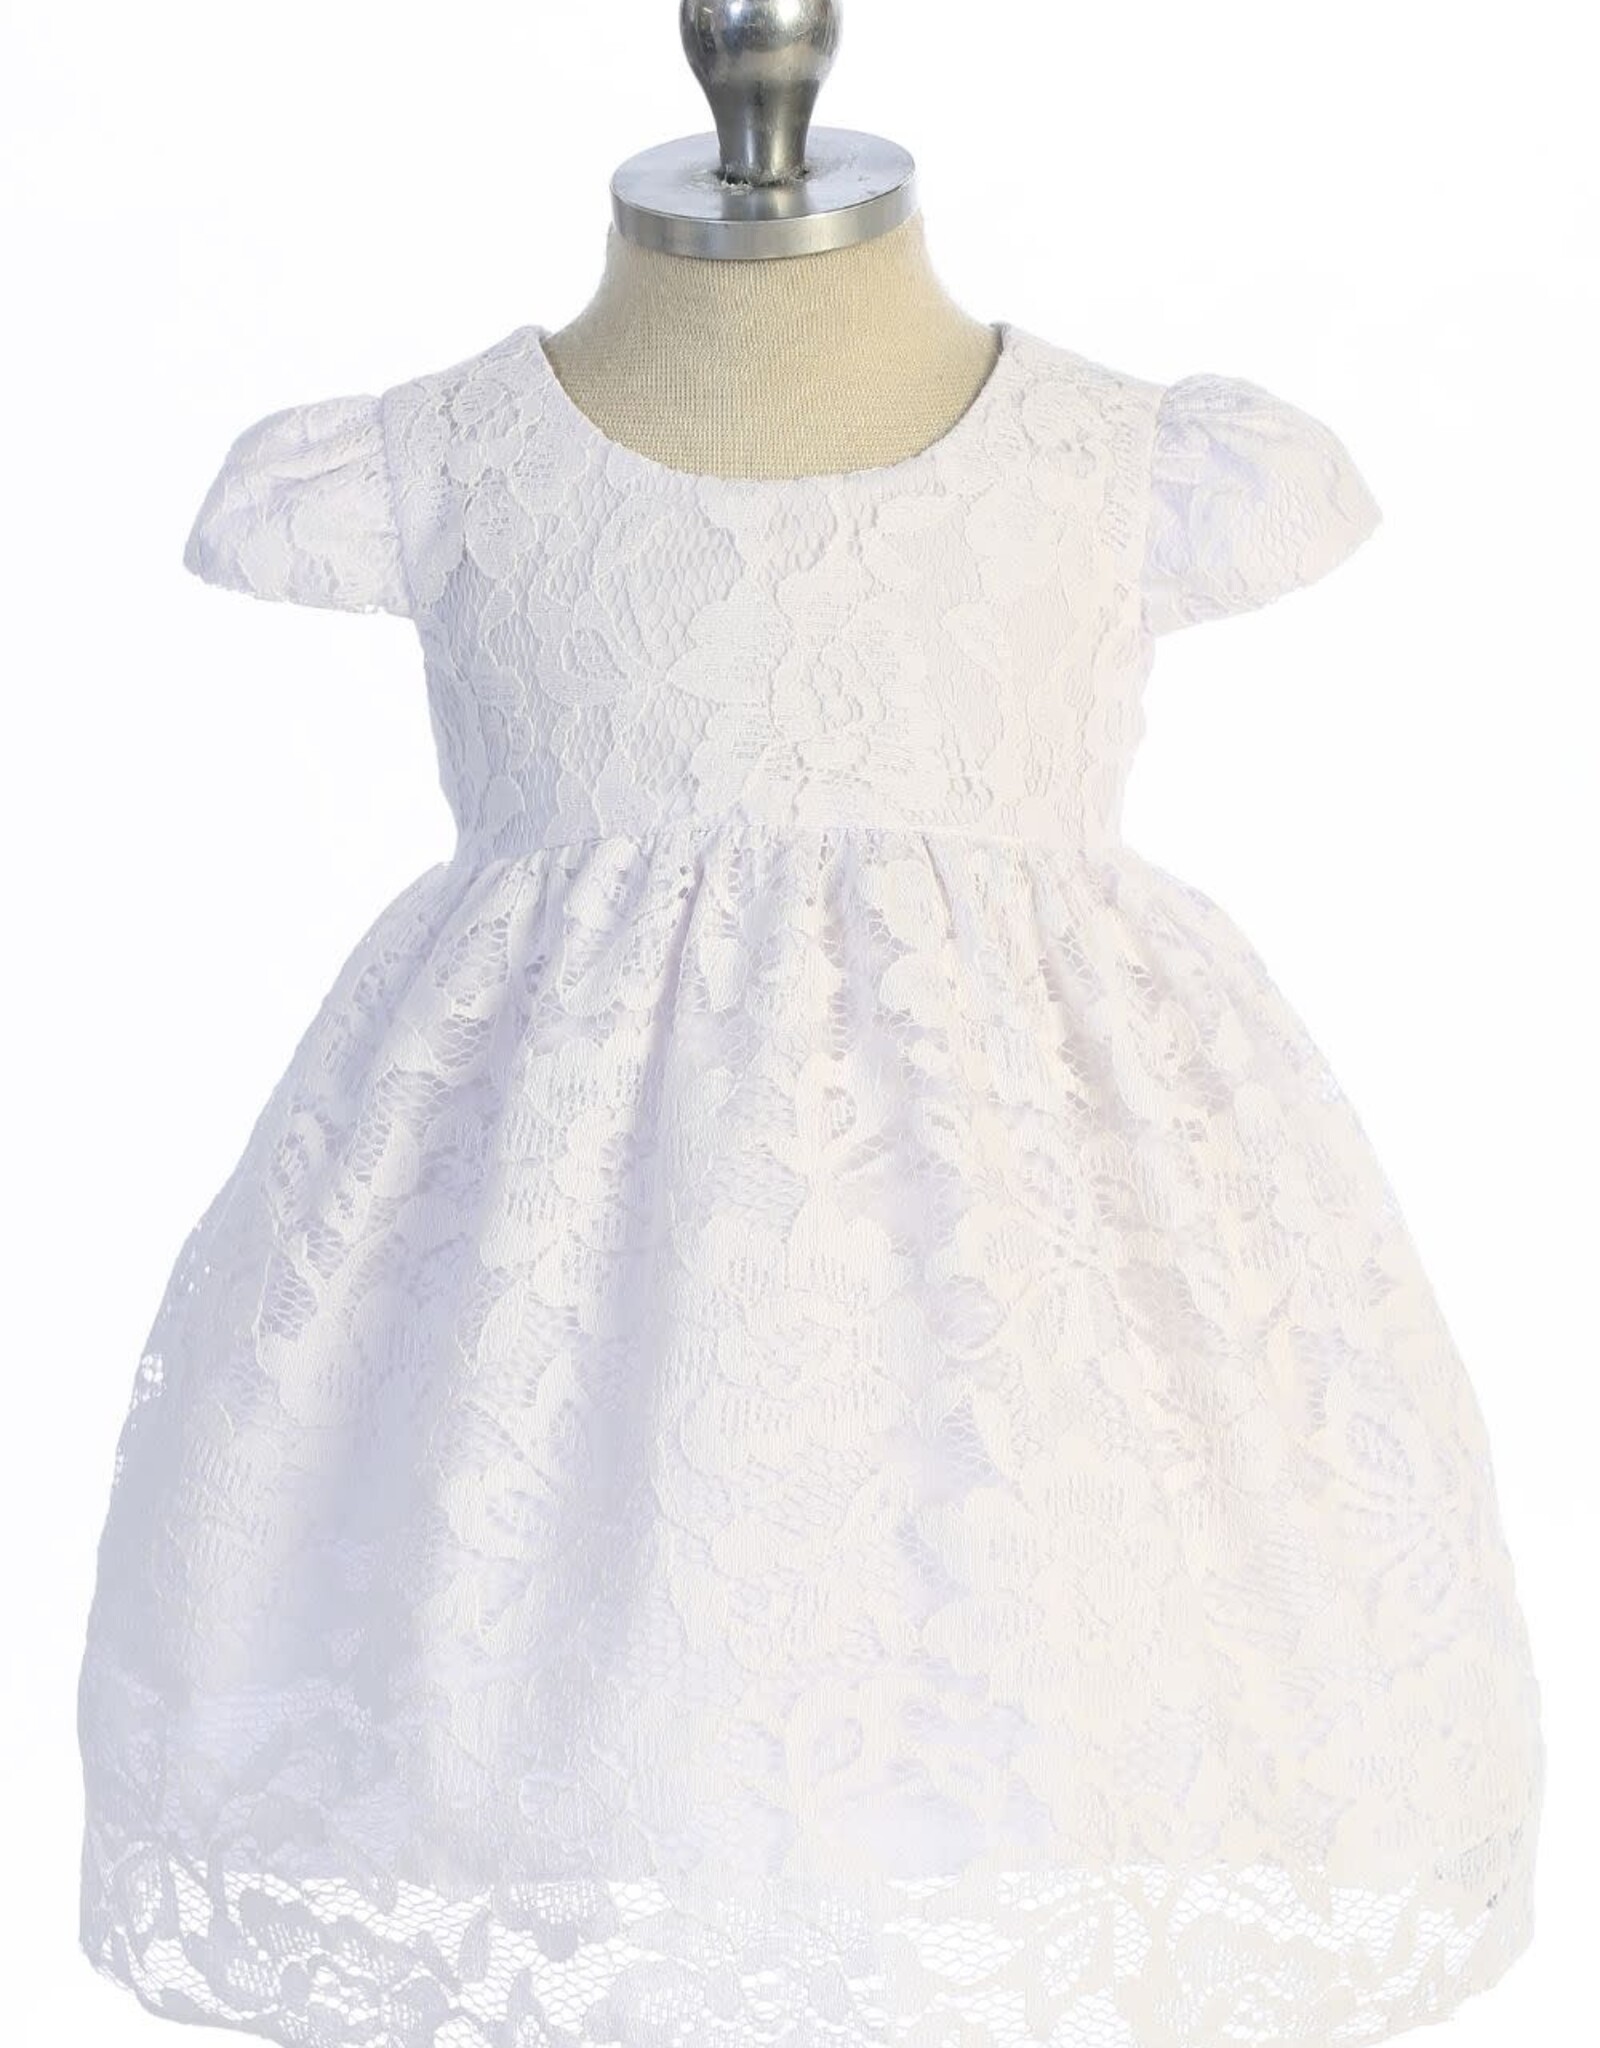 Baby V-Back Bow Lace Dress w/Pearl Trim